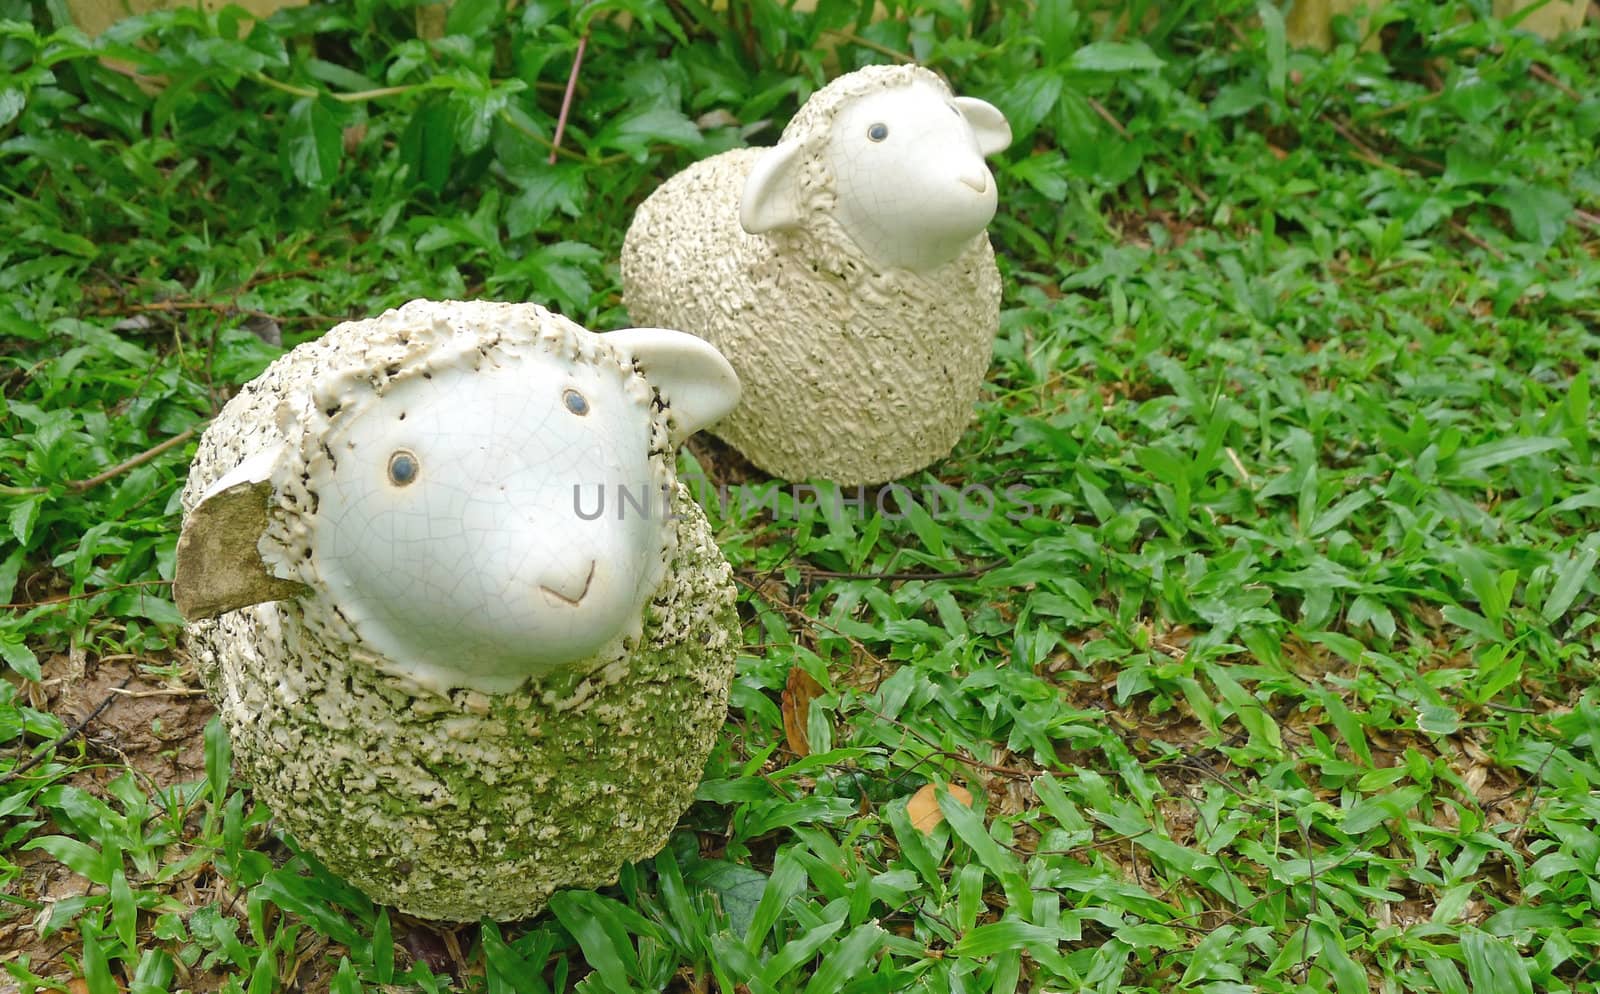 Two sheep statues decorate in a garden